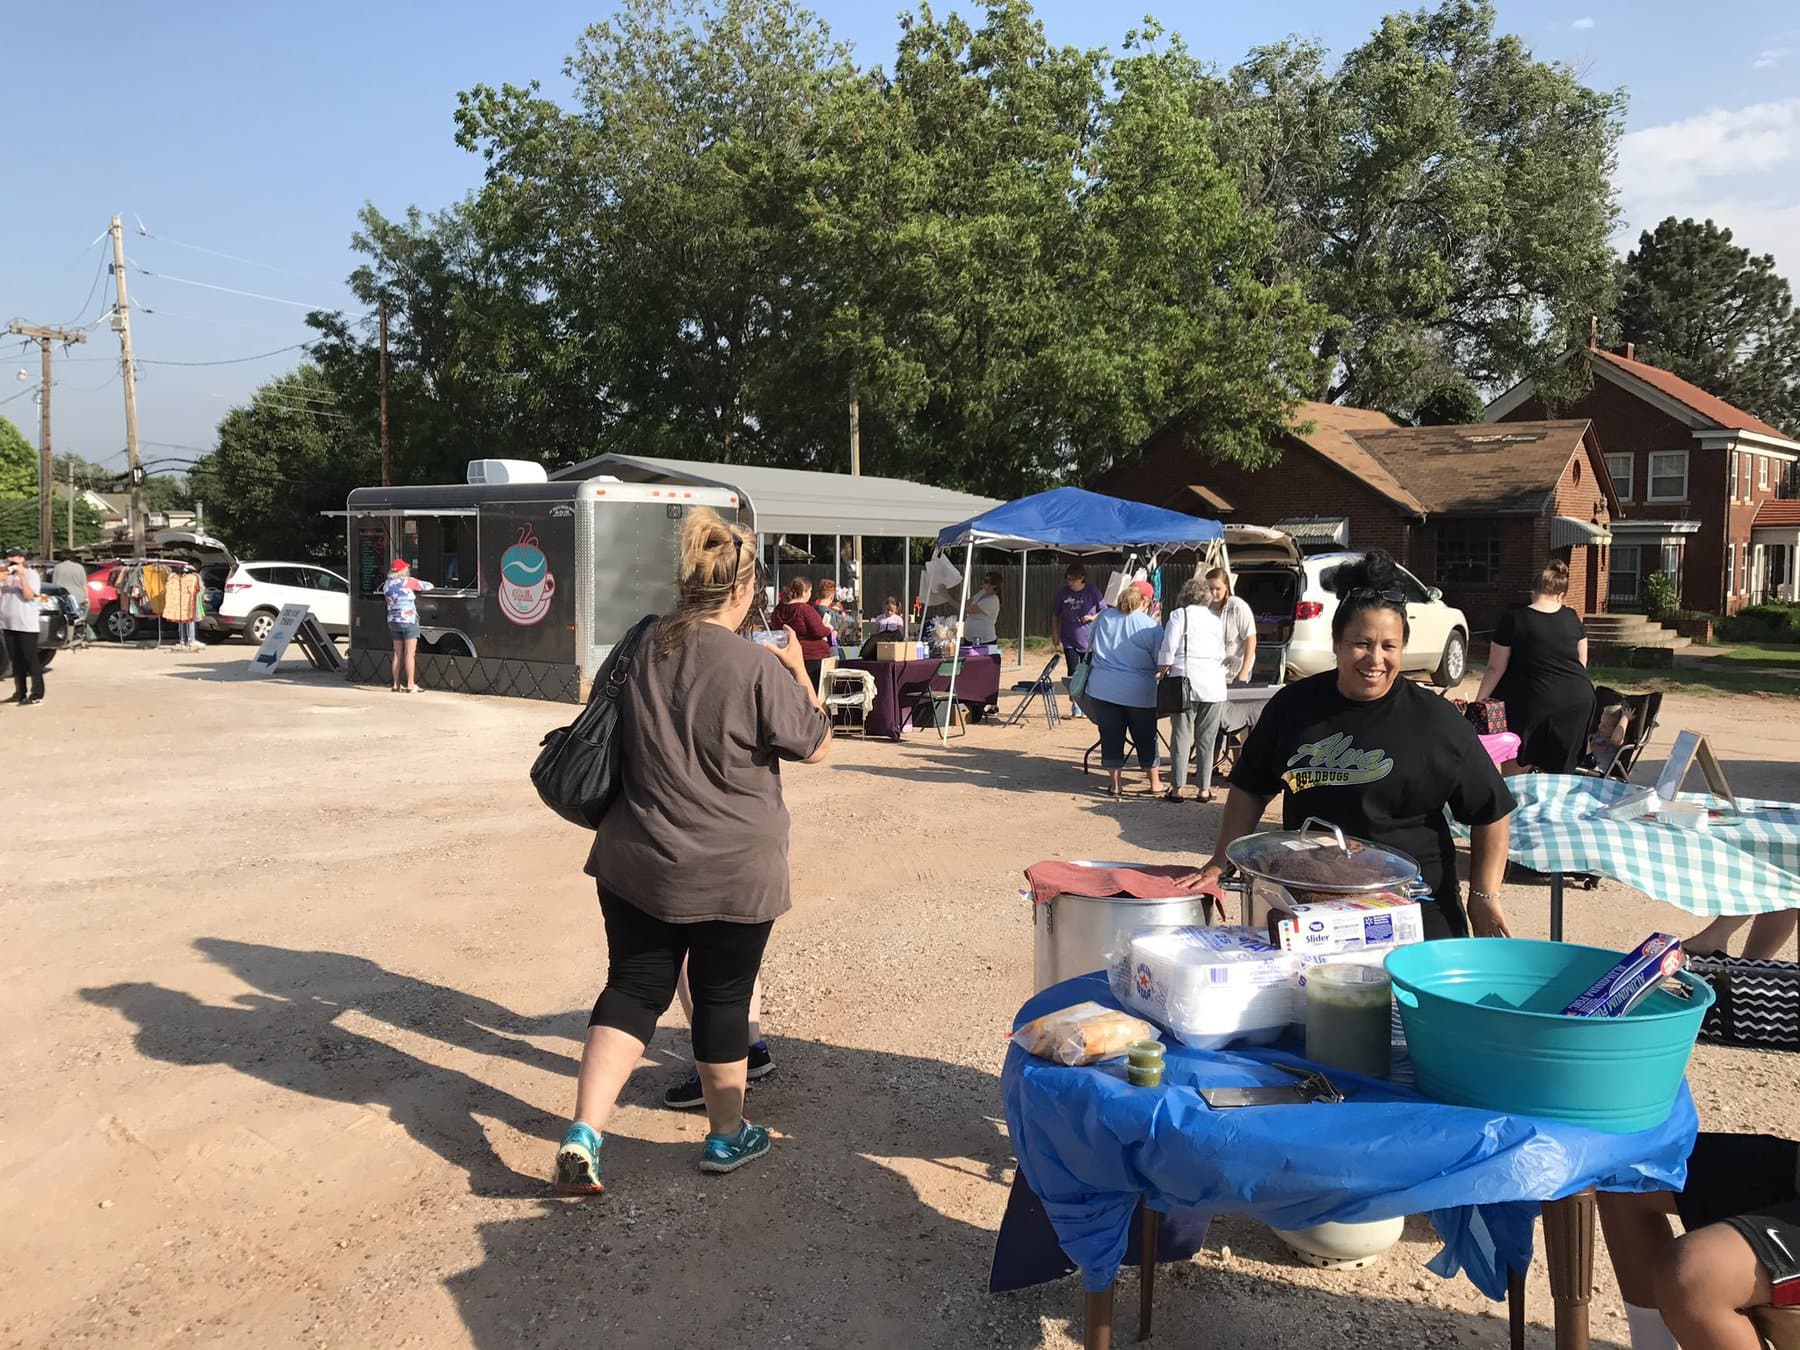 An empty lot with pop-up booths and a food truck, with diverse people enjoying the market.